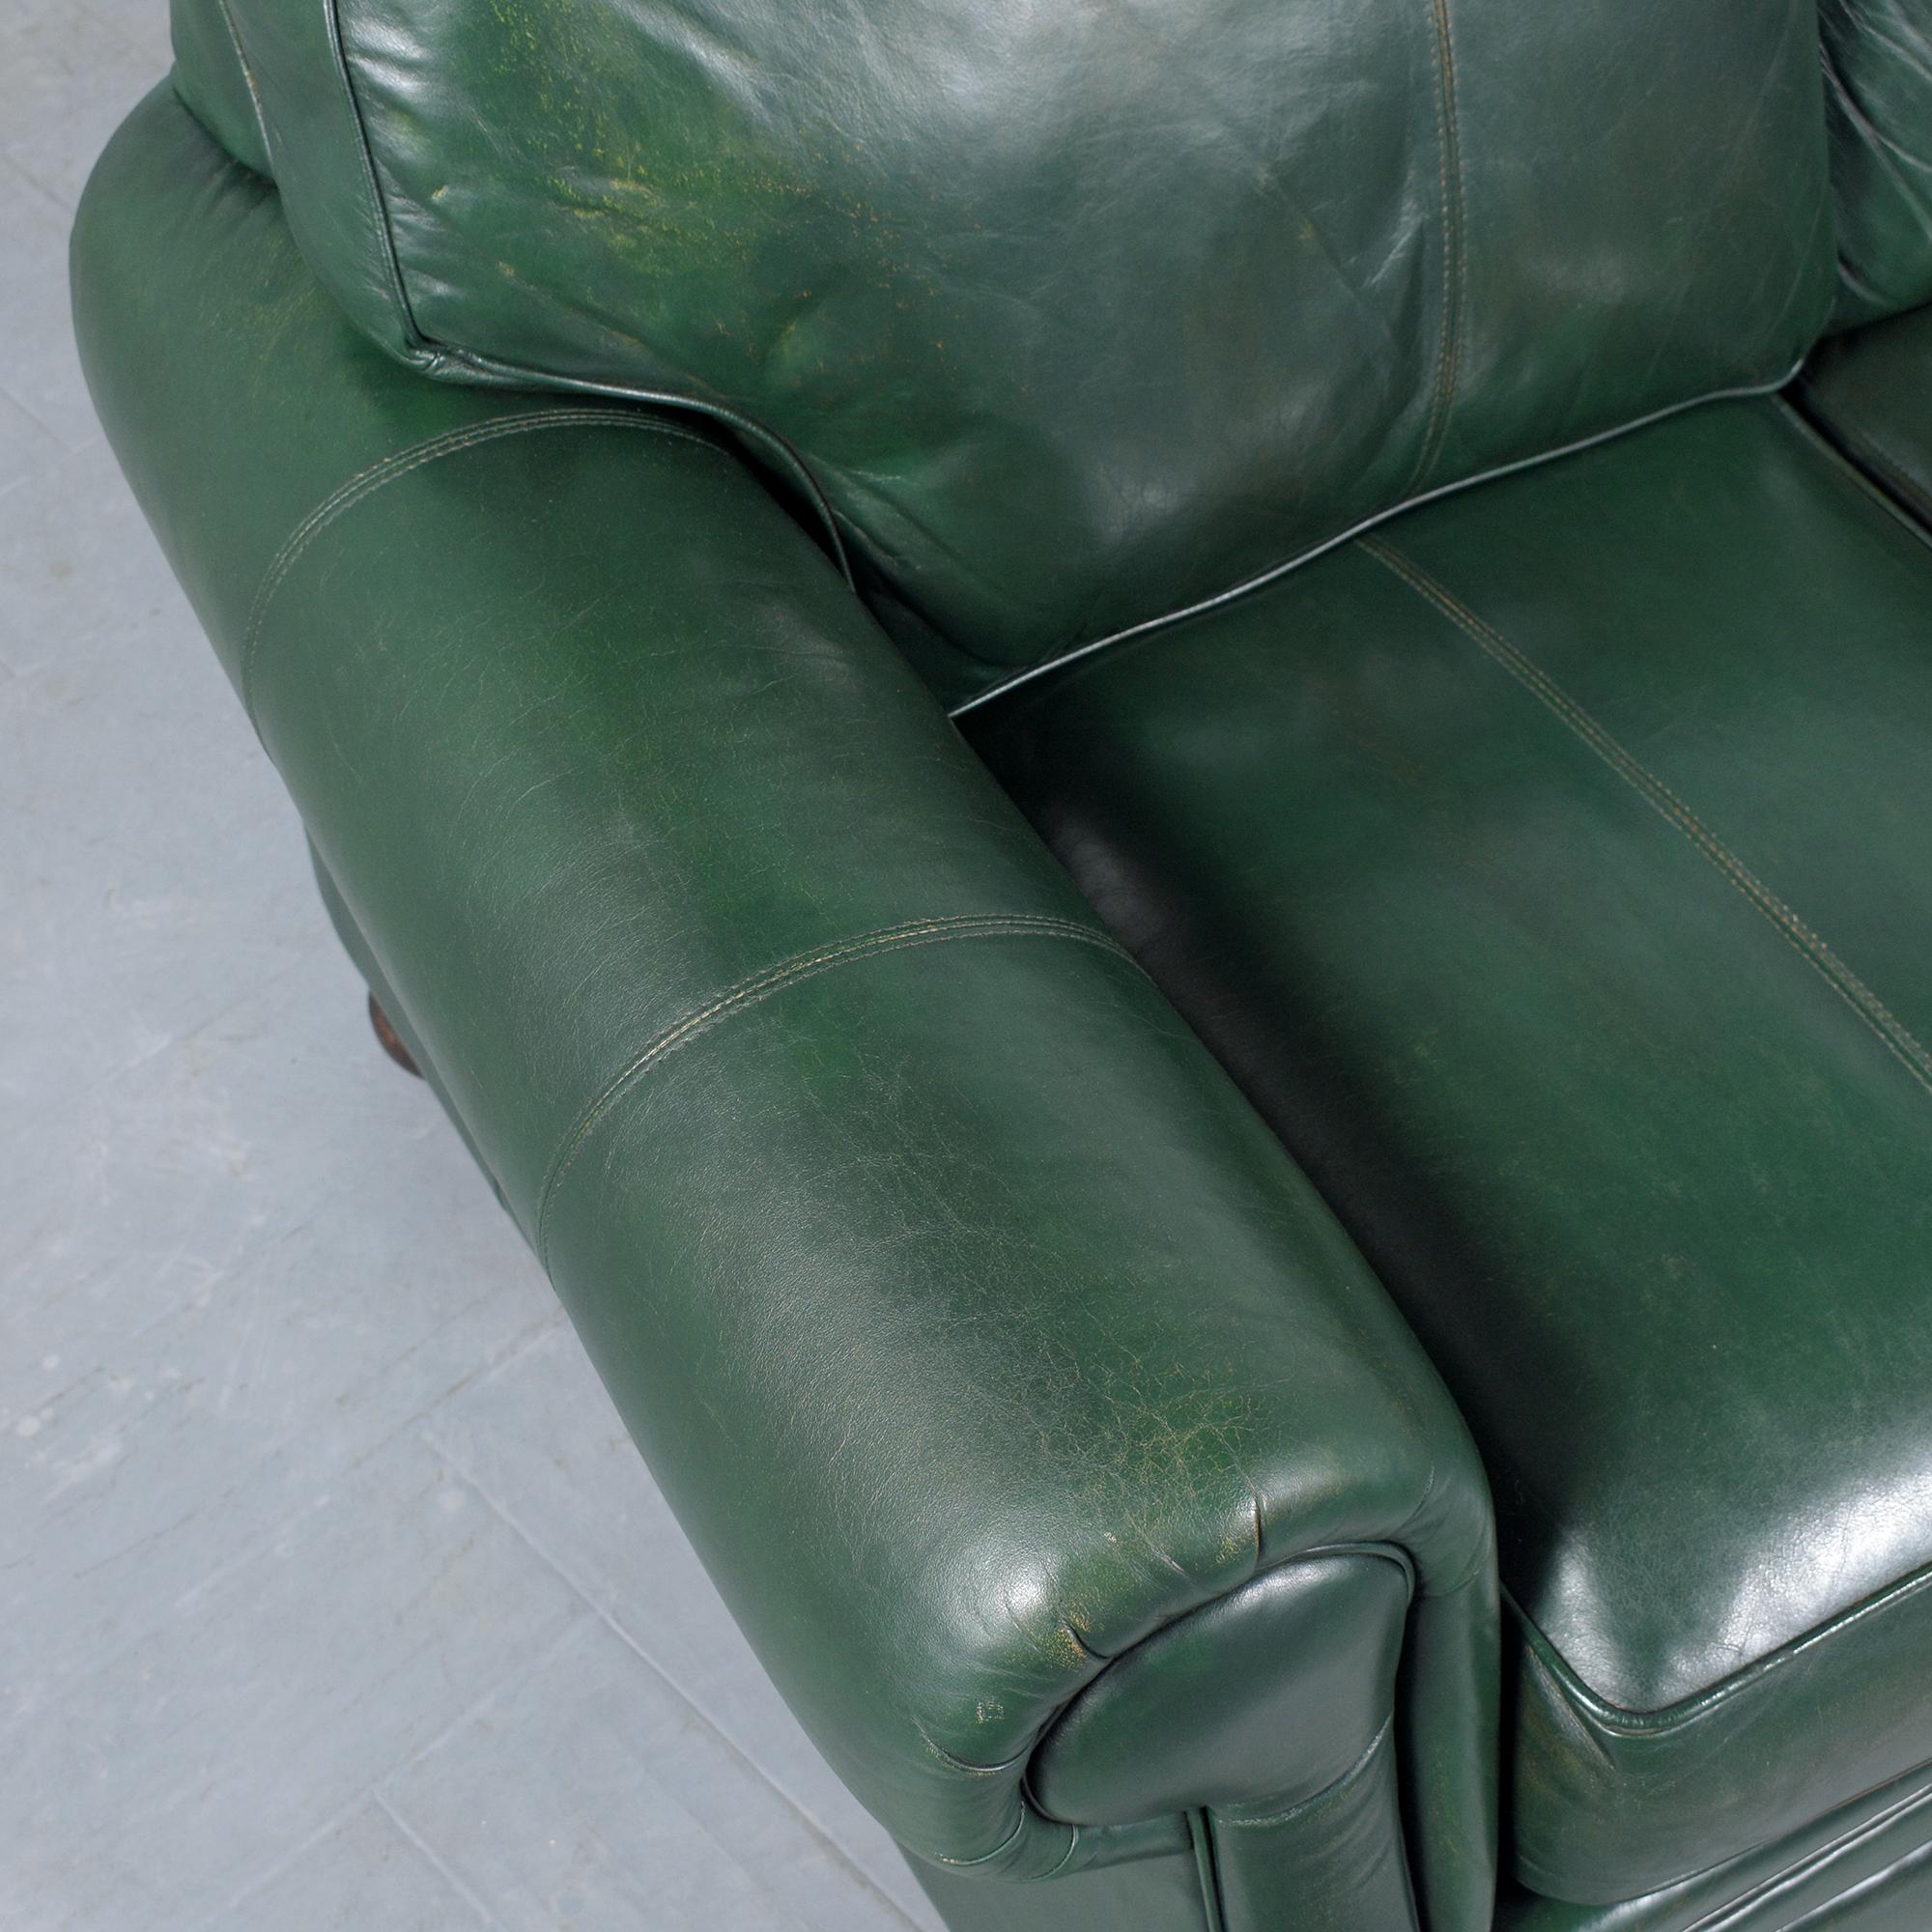 Late 20th Century Elegant 1980s Restored Leather Sofa: A Blend of Vintage and Modern For Sale